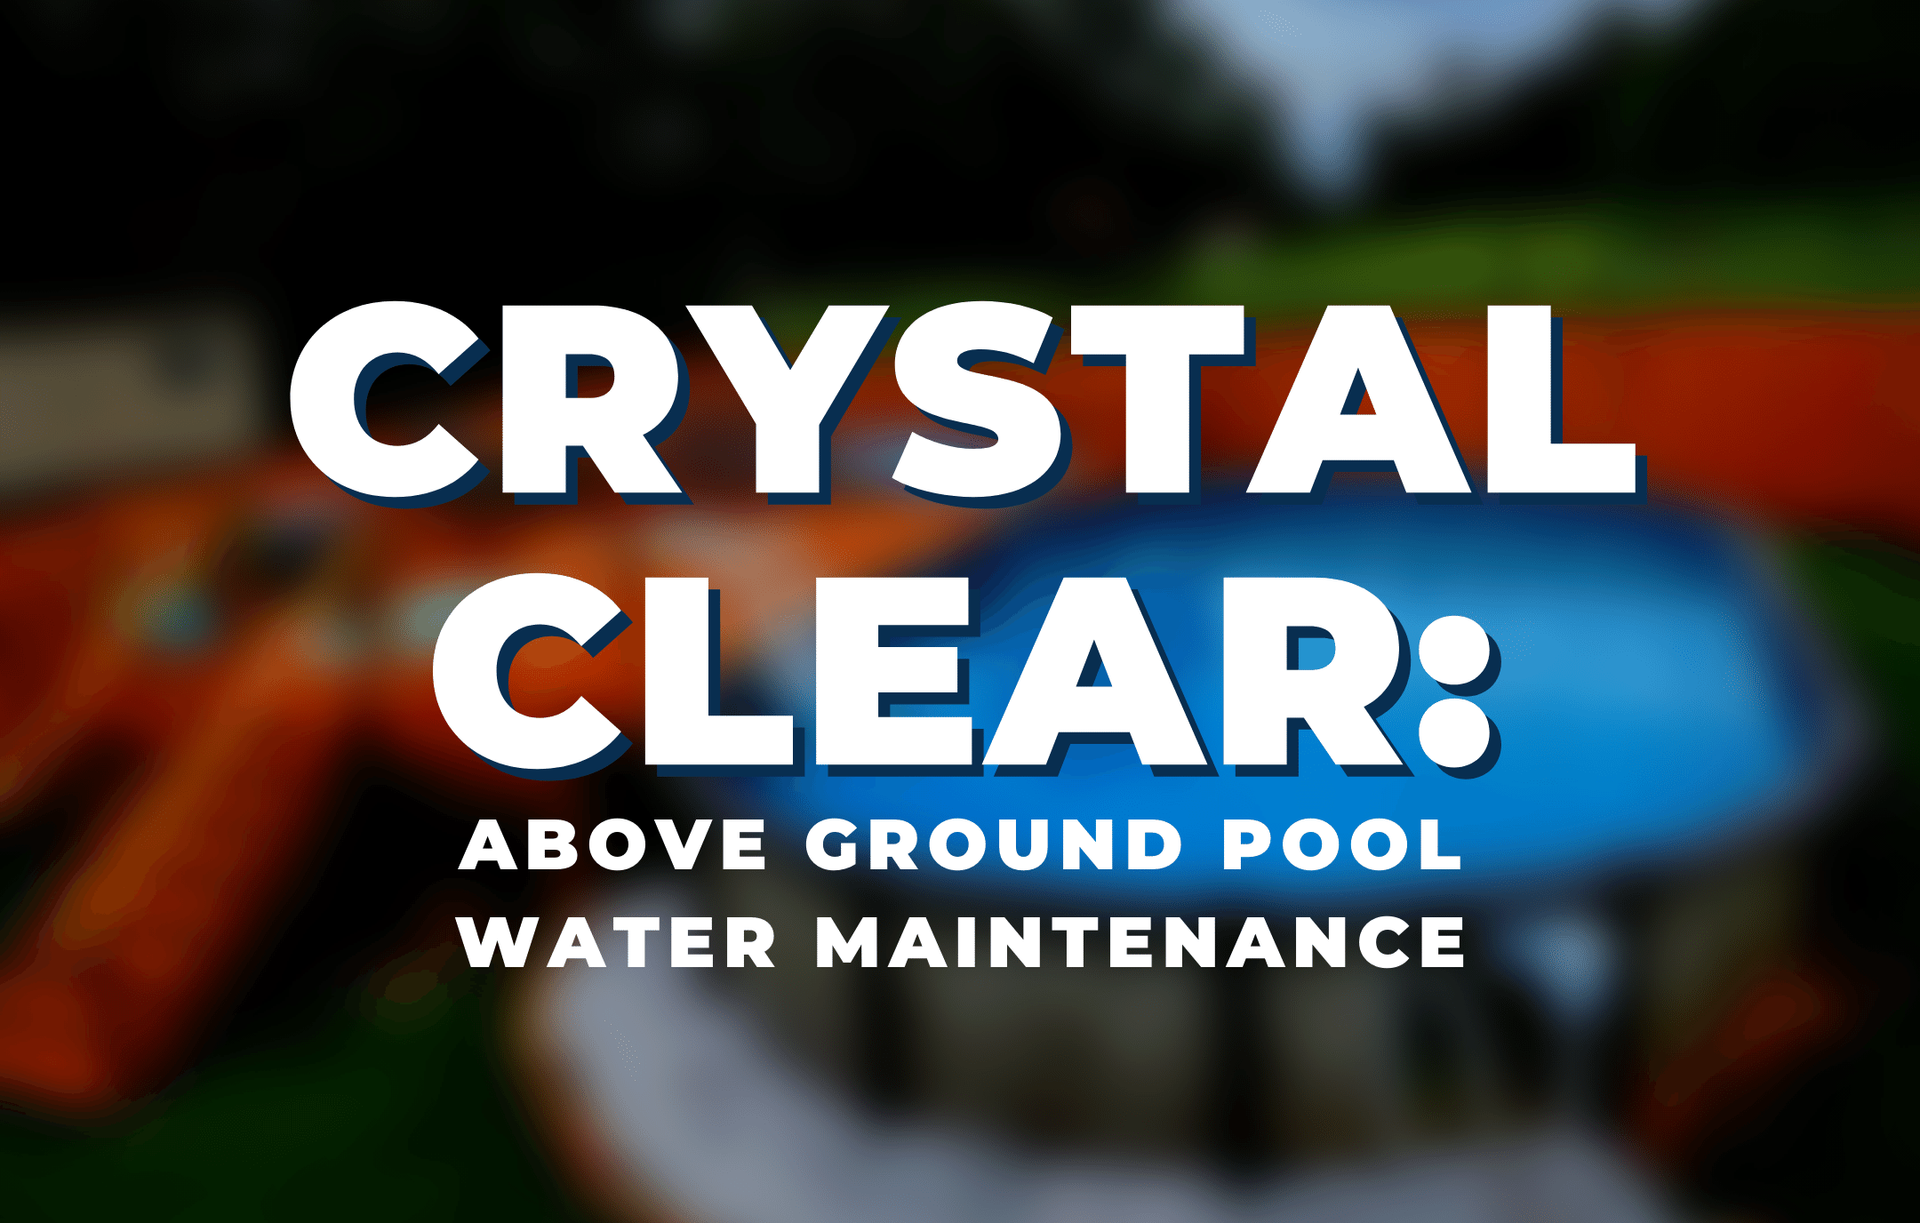 crystal-clear-above-ground-pool-water-maintenance-featured.png__PID:52754a8a-1545-47e8-af0d-33b8554acbd5